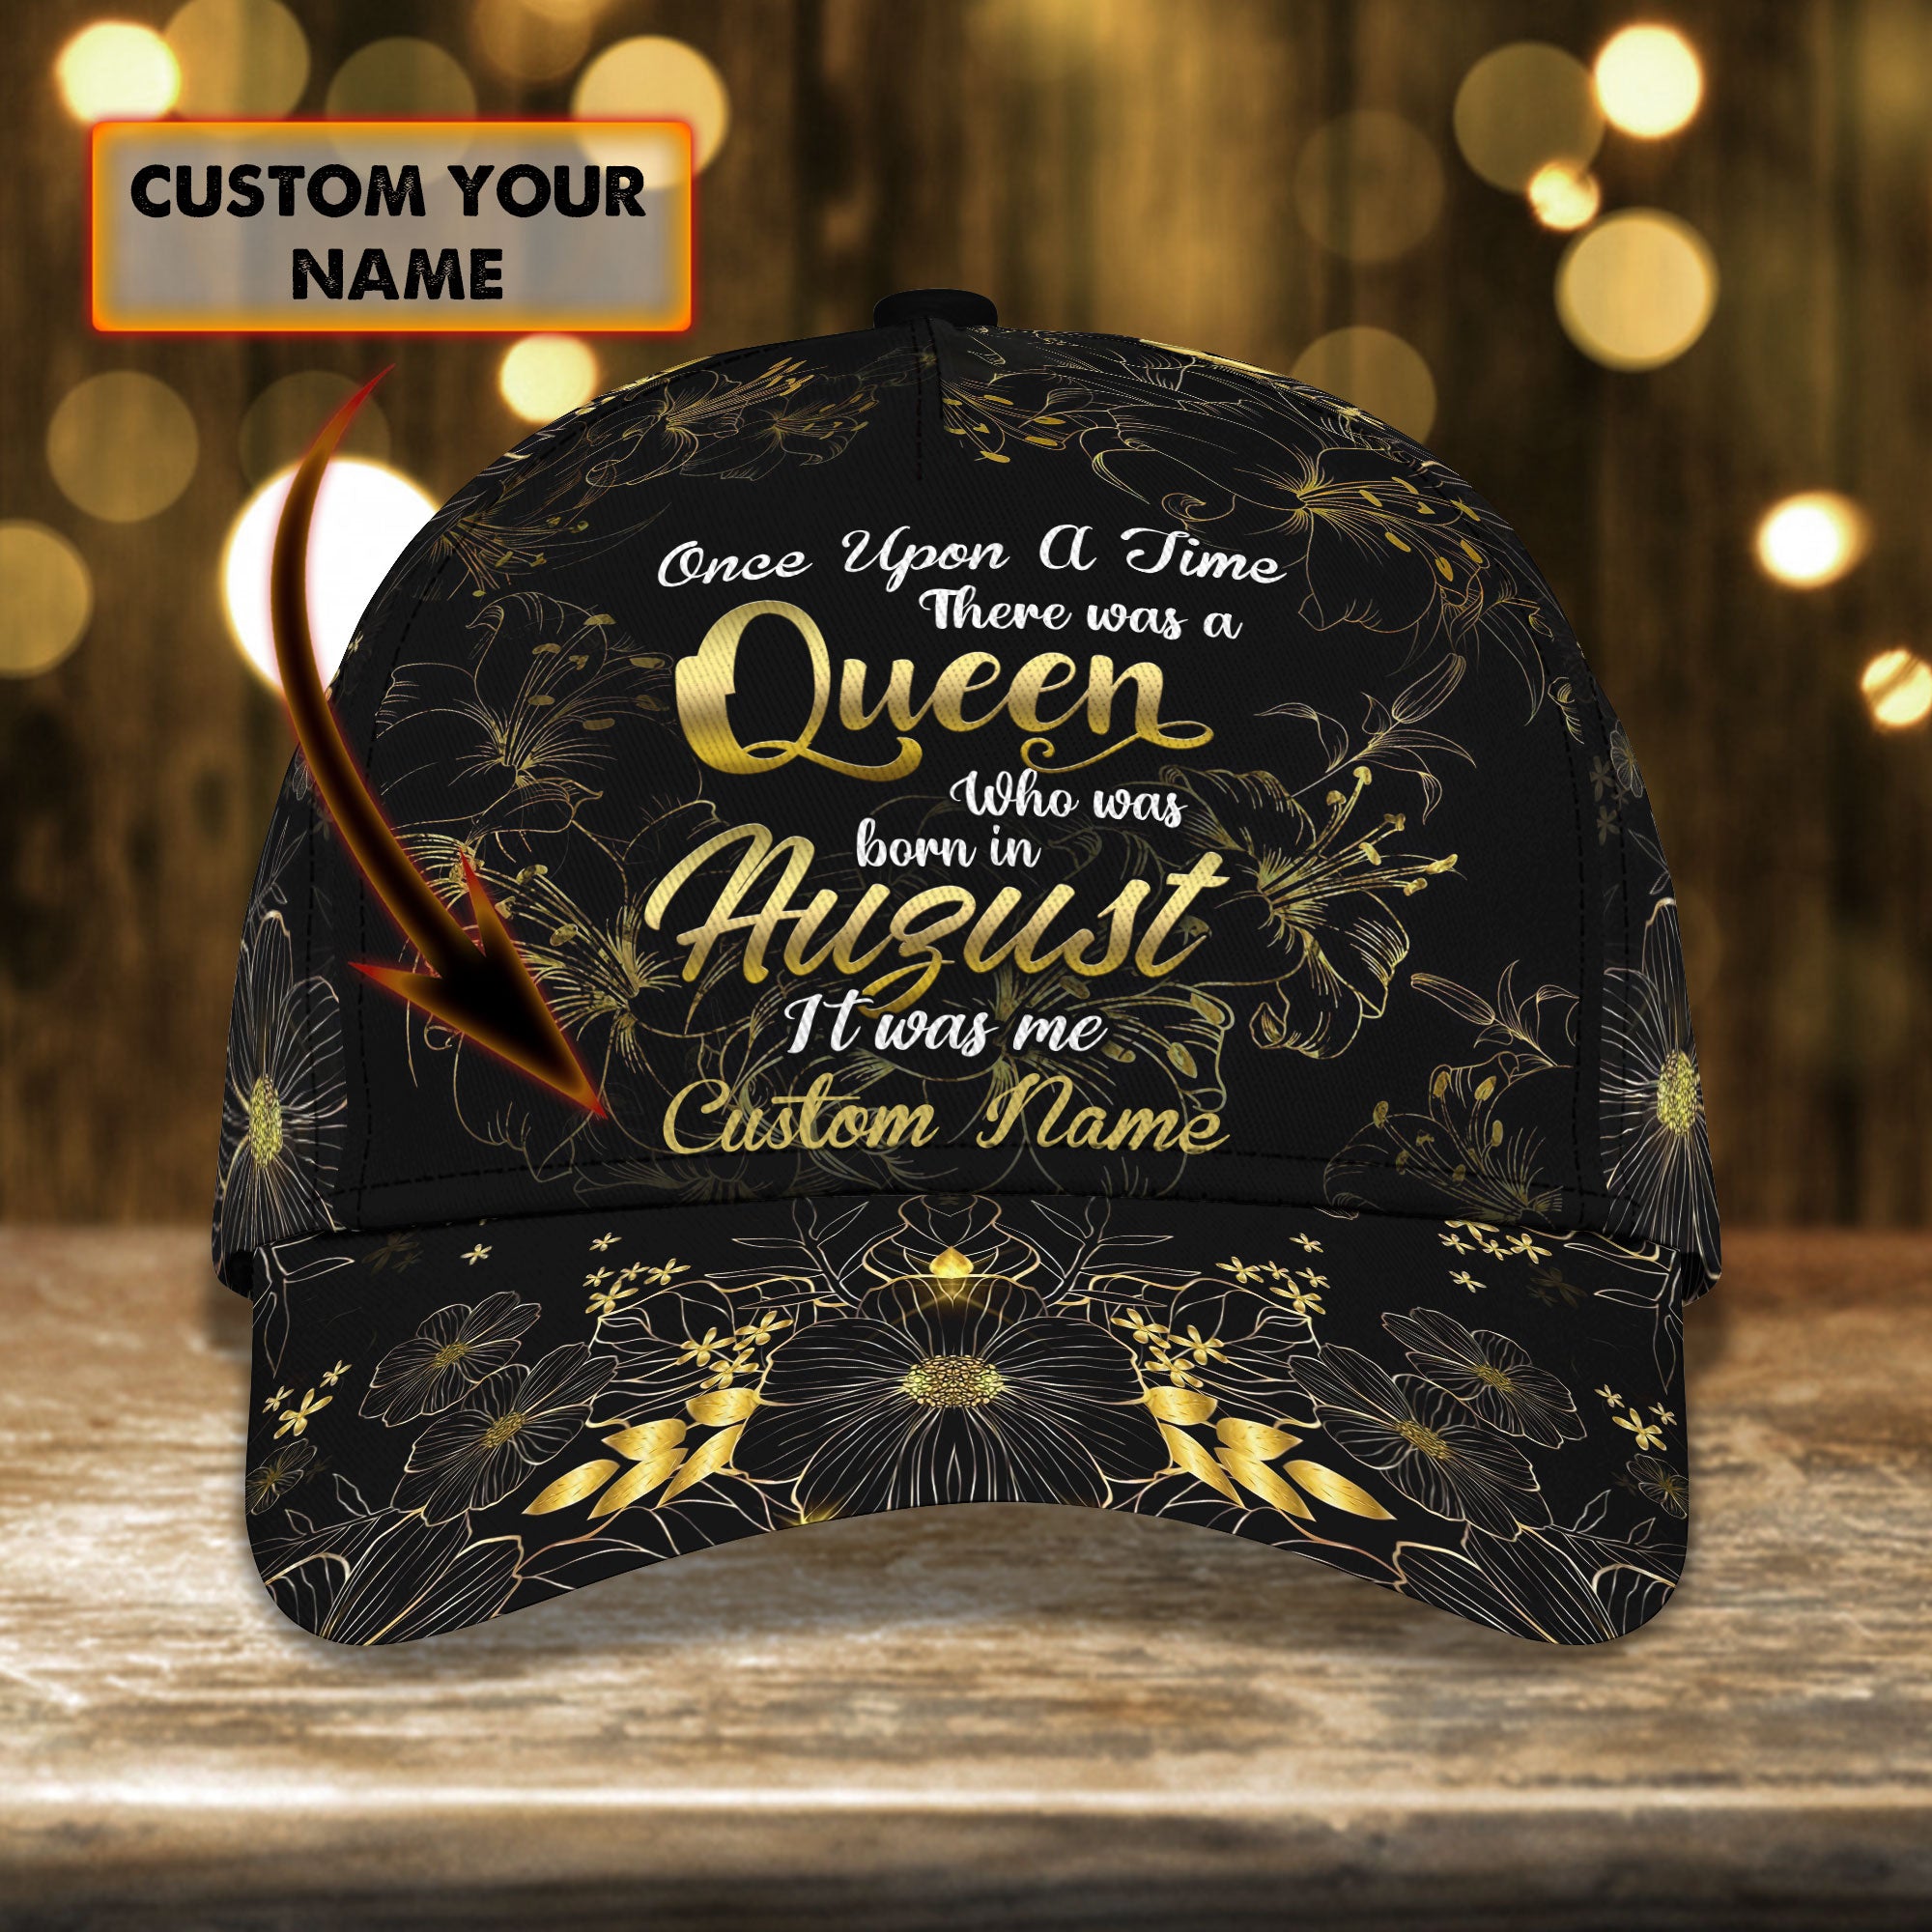 Once Upon a time in August - Personalized Name Cap - Loop - Vhv-cap-045